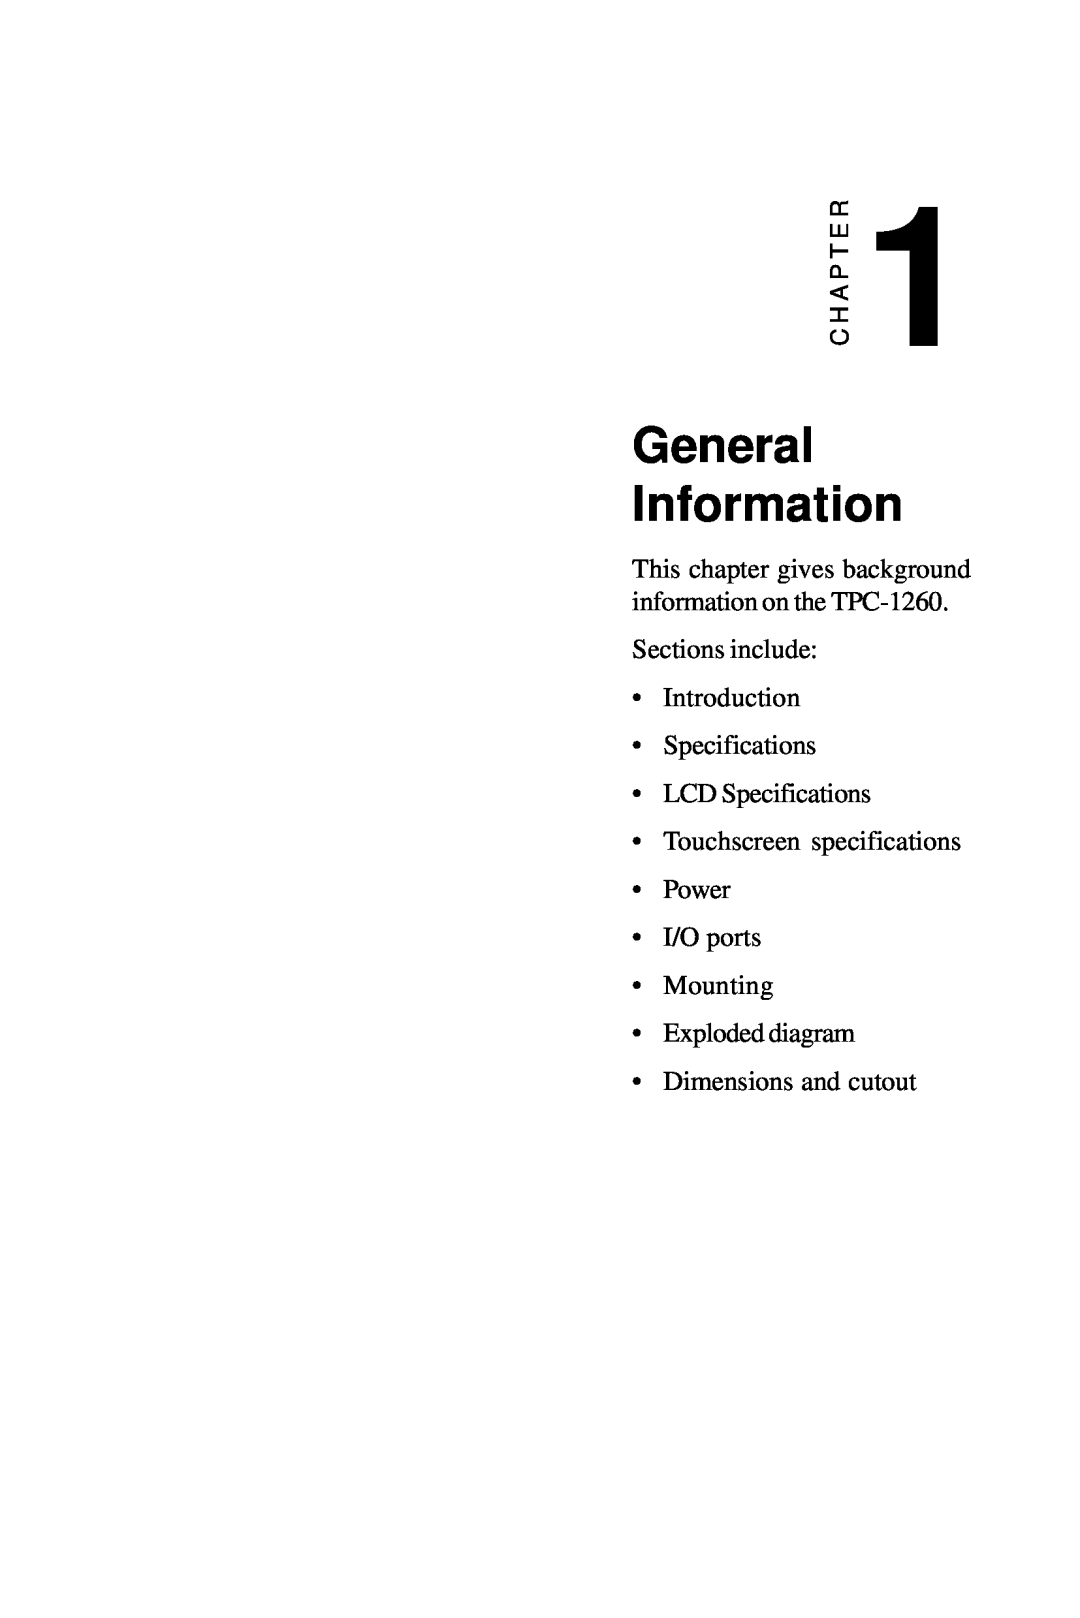 Advantech manual General Information, This chapter gives background information on the TPC-1260, Dimensions and cutout 